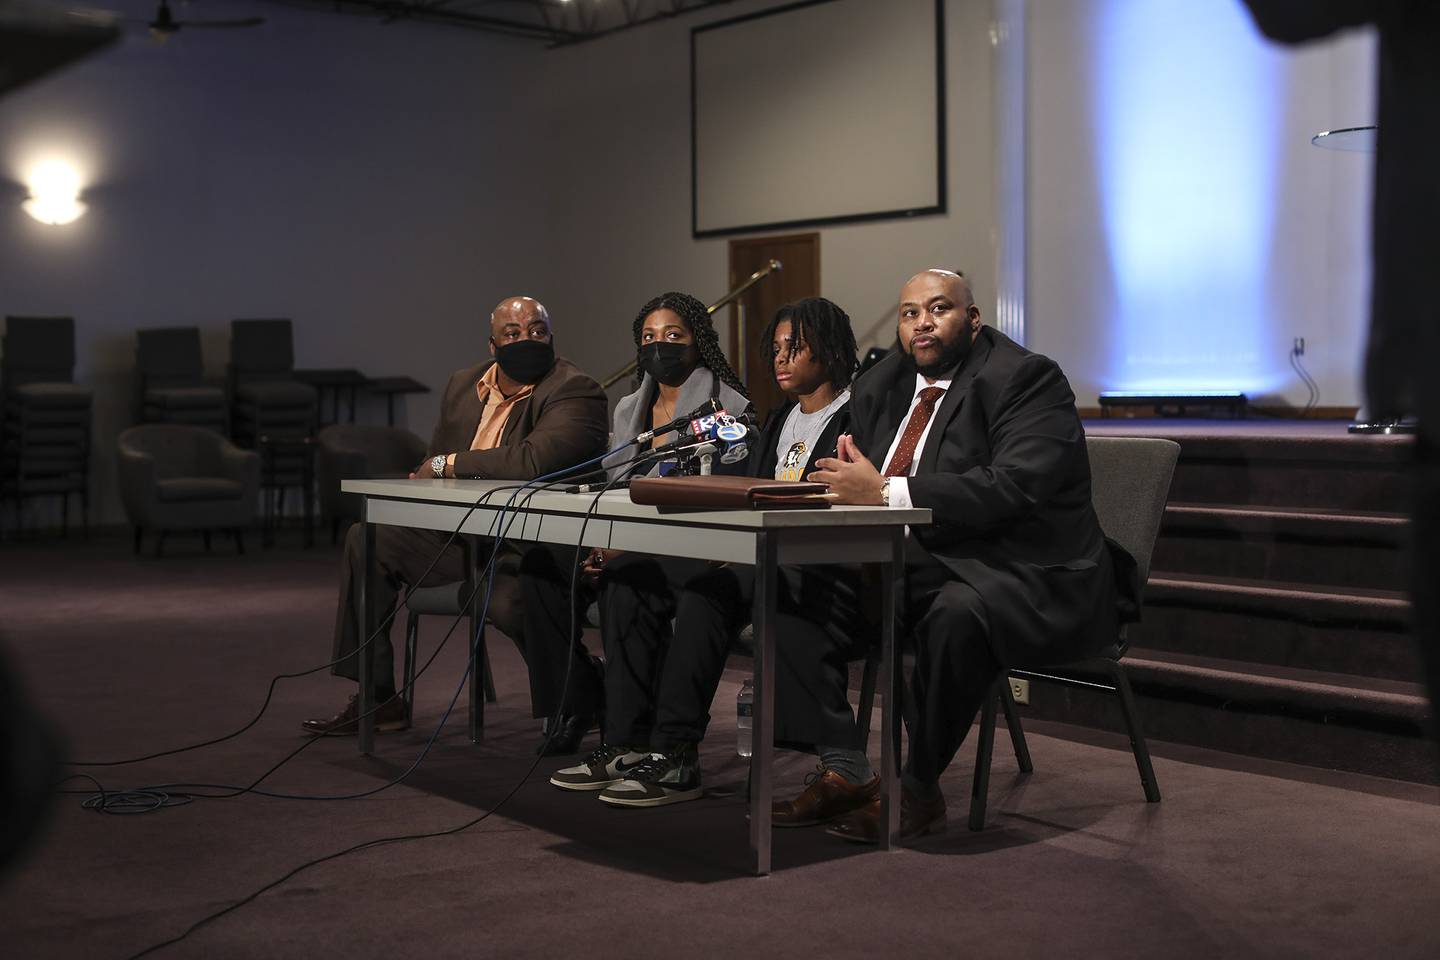 Jazzpher Evans (center right), her family, and local attorney Keenan Saulter (right) take questions from reporters on Thursday, April 8, 2021, at One Vision Worship Center in Joliet, Ill. Evans, a current Quincy University student and Joliet West High School graduate was allegedly assaulted in a racially motivated attack on Sunday night at a local Quincy bar.